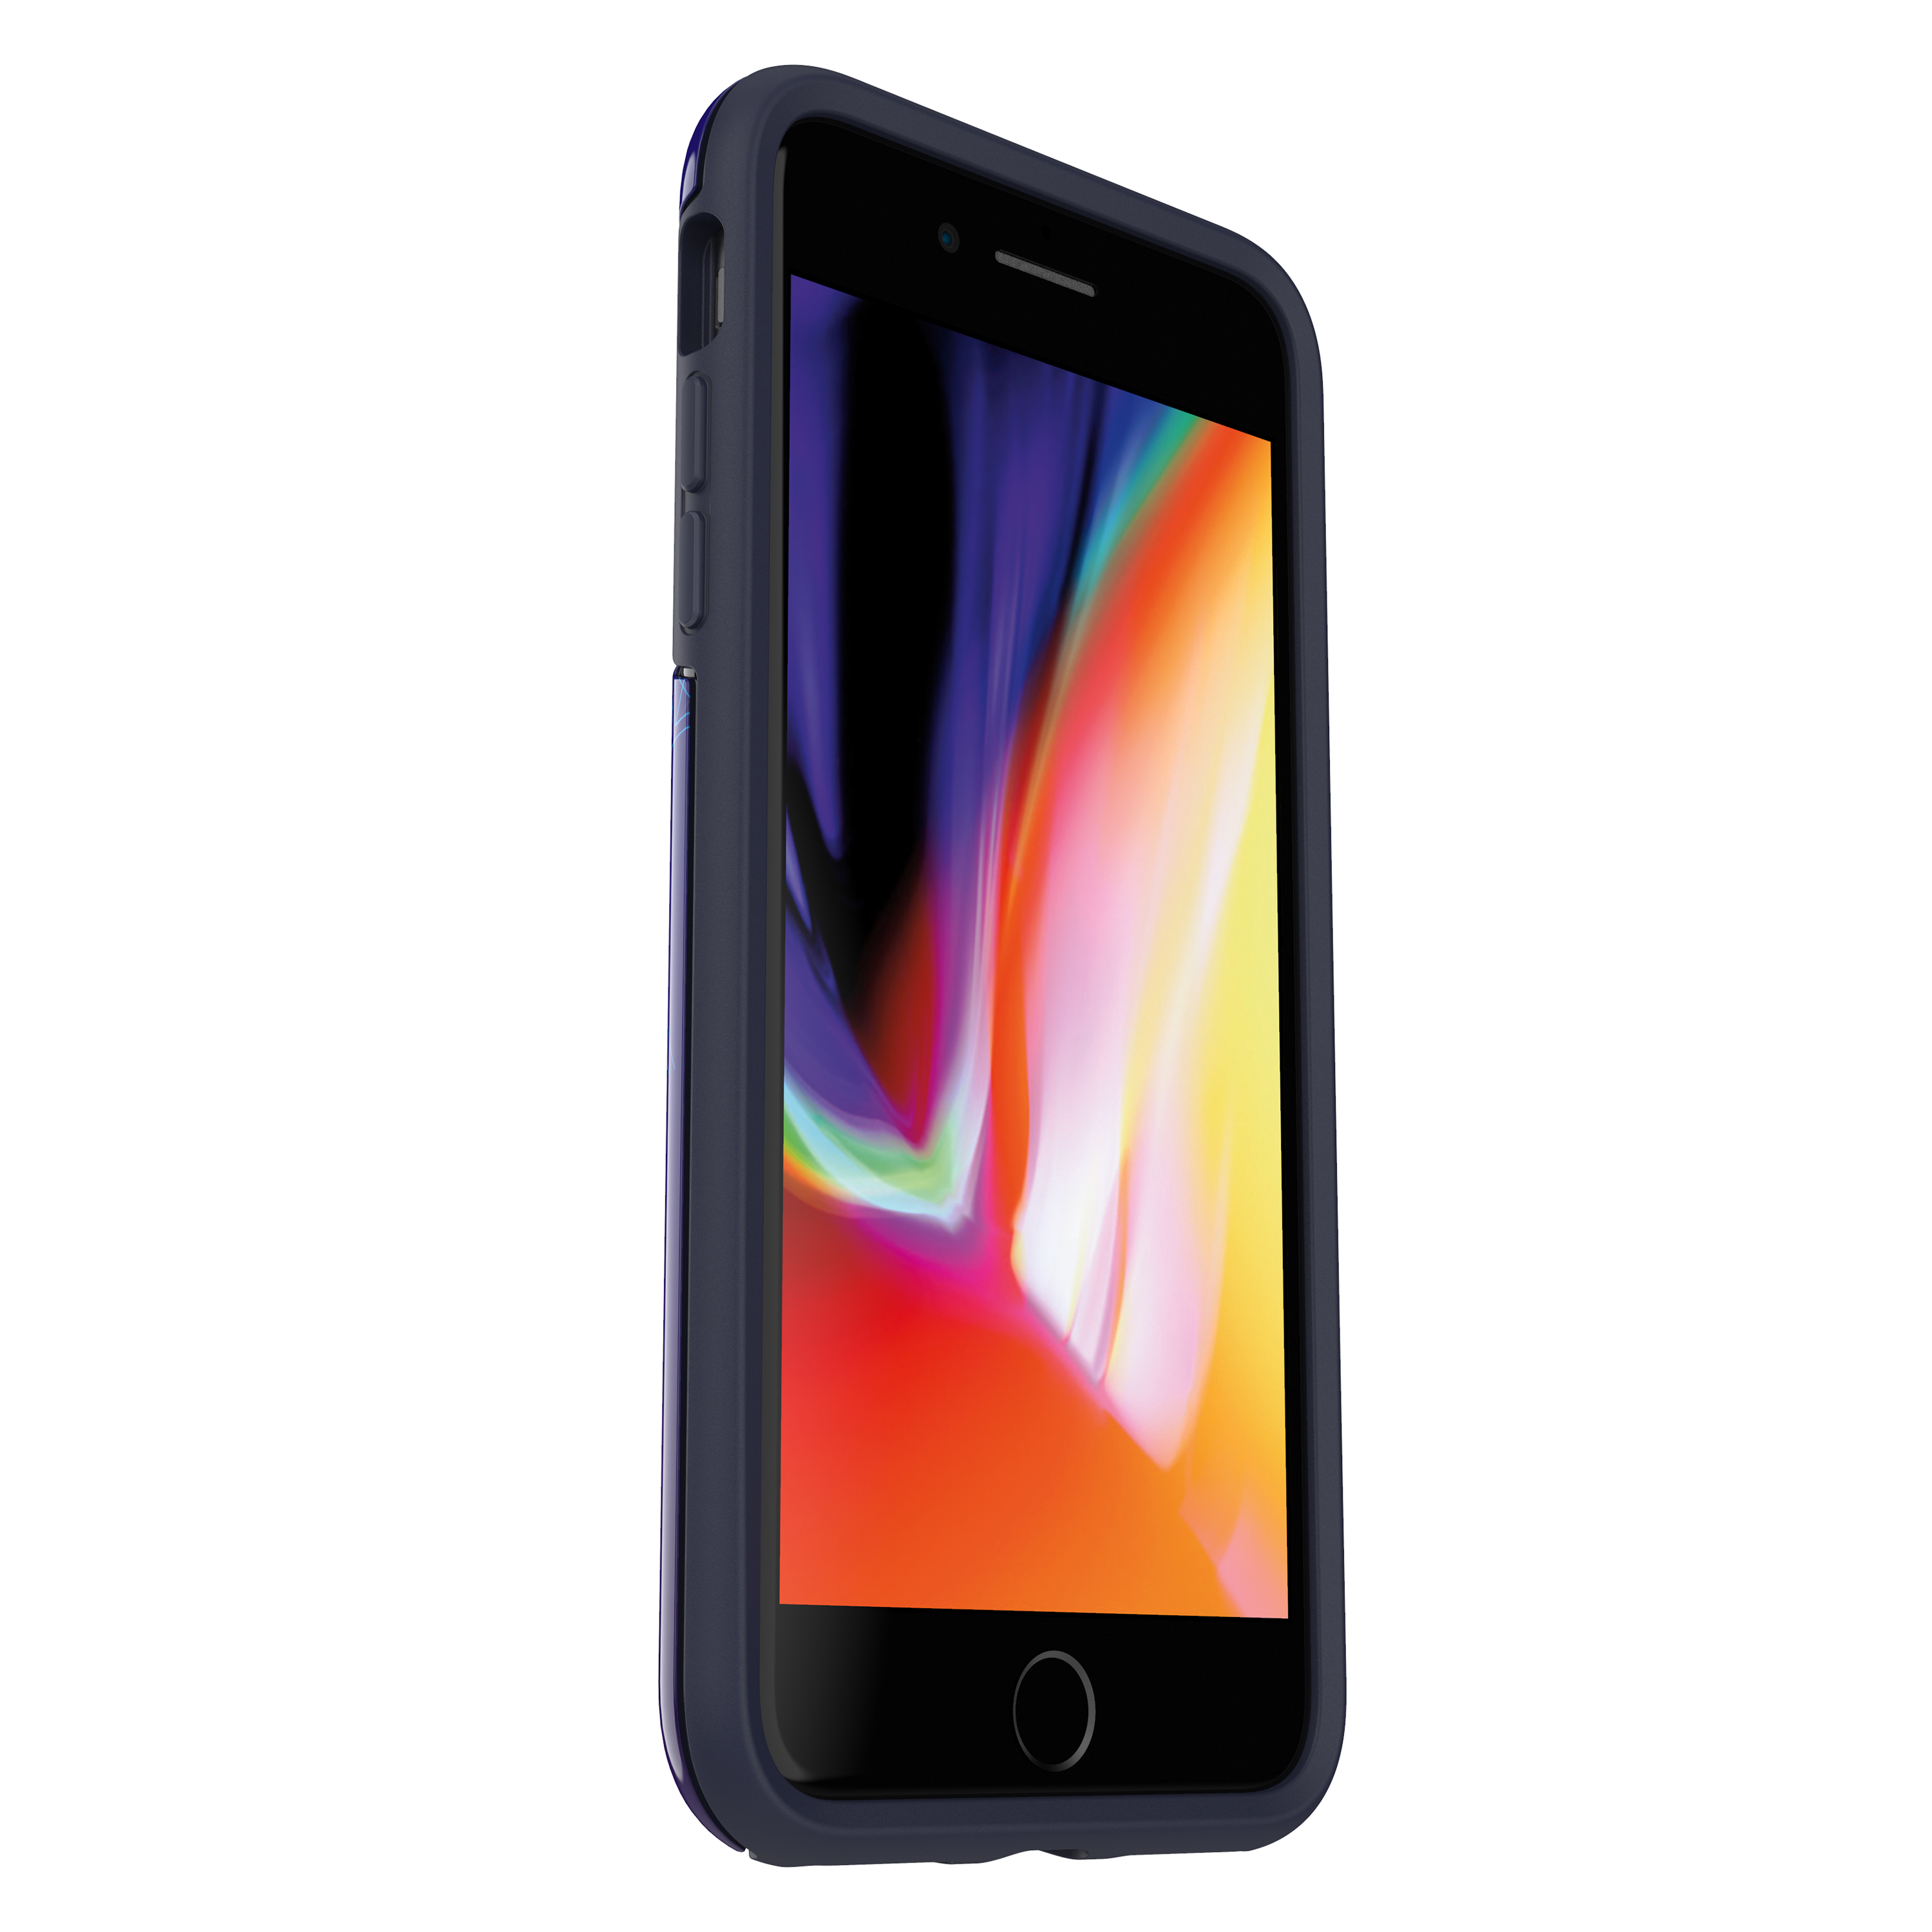 Otterbox Apple Symmetry Case for iPhone 8 Plus/7 Plus, Black Panther - image 2 of 10